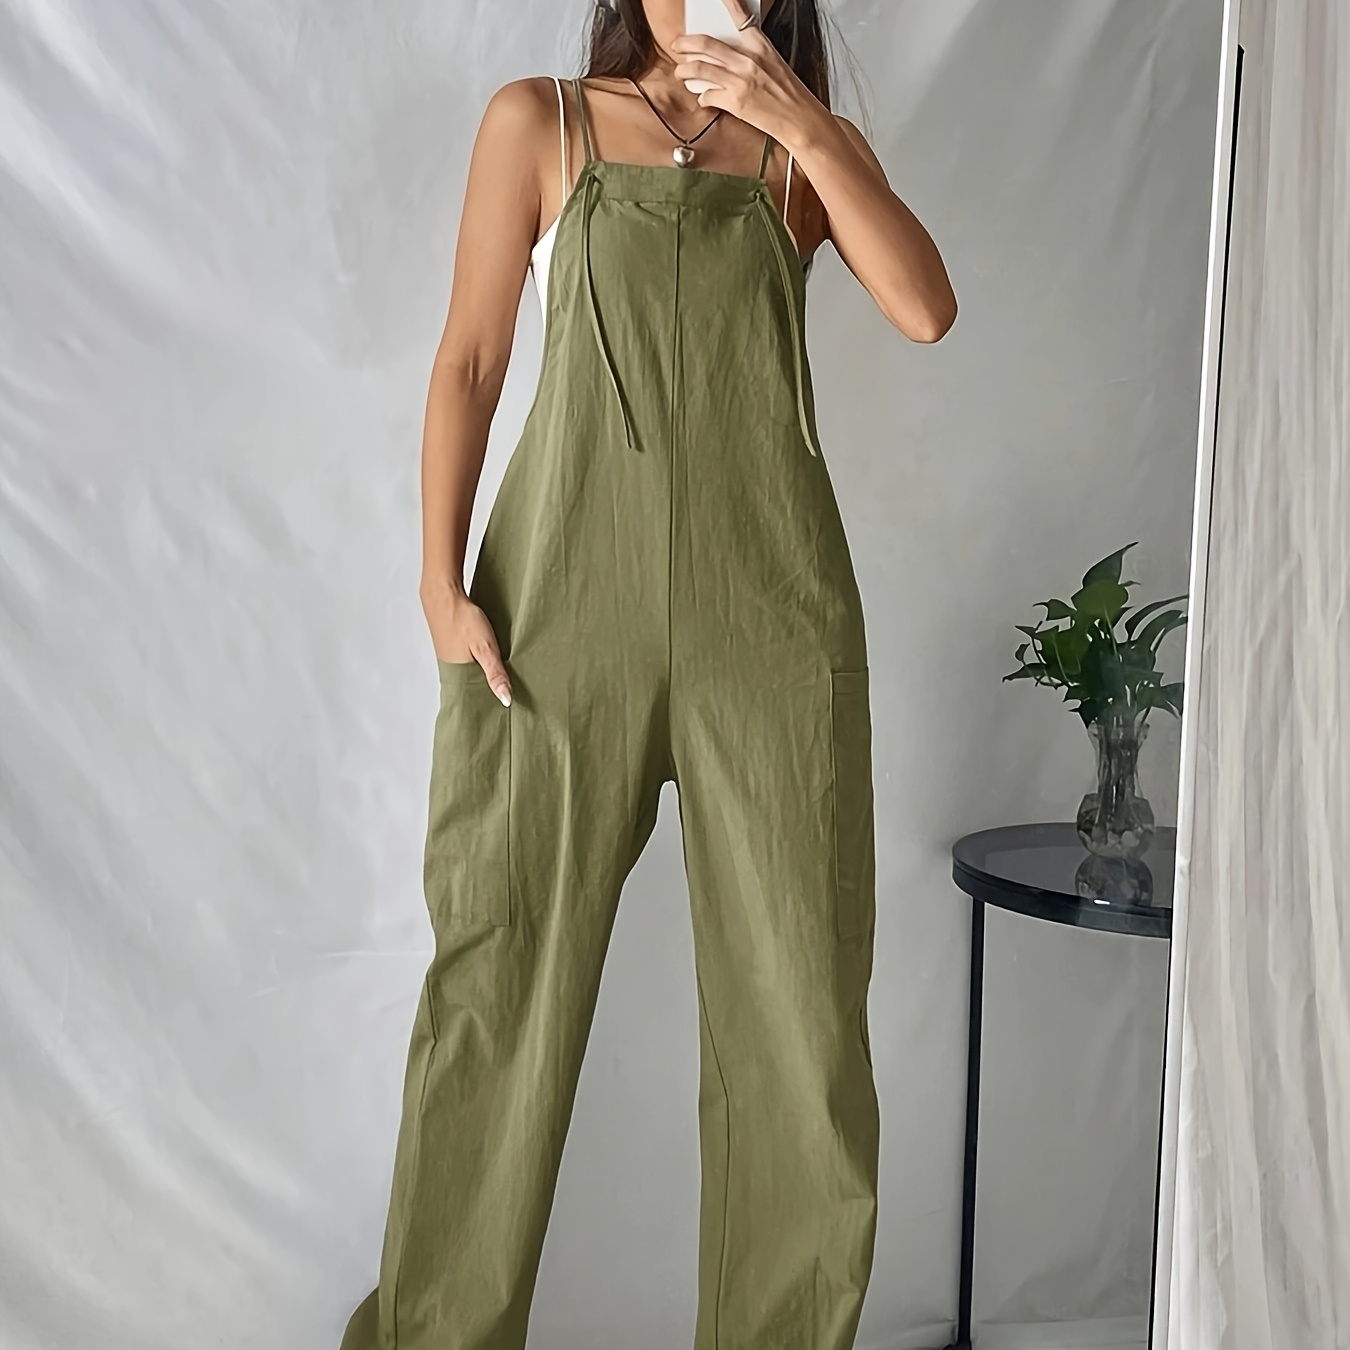 

Solid Color Spaghetti Strap Overalls, Casual Sleeveless Straight Leg Jumpsuit For Spring & Summer, Women's Clothing